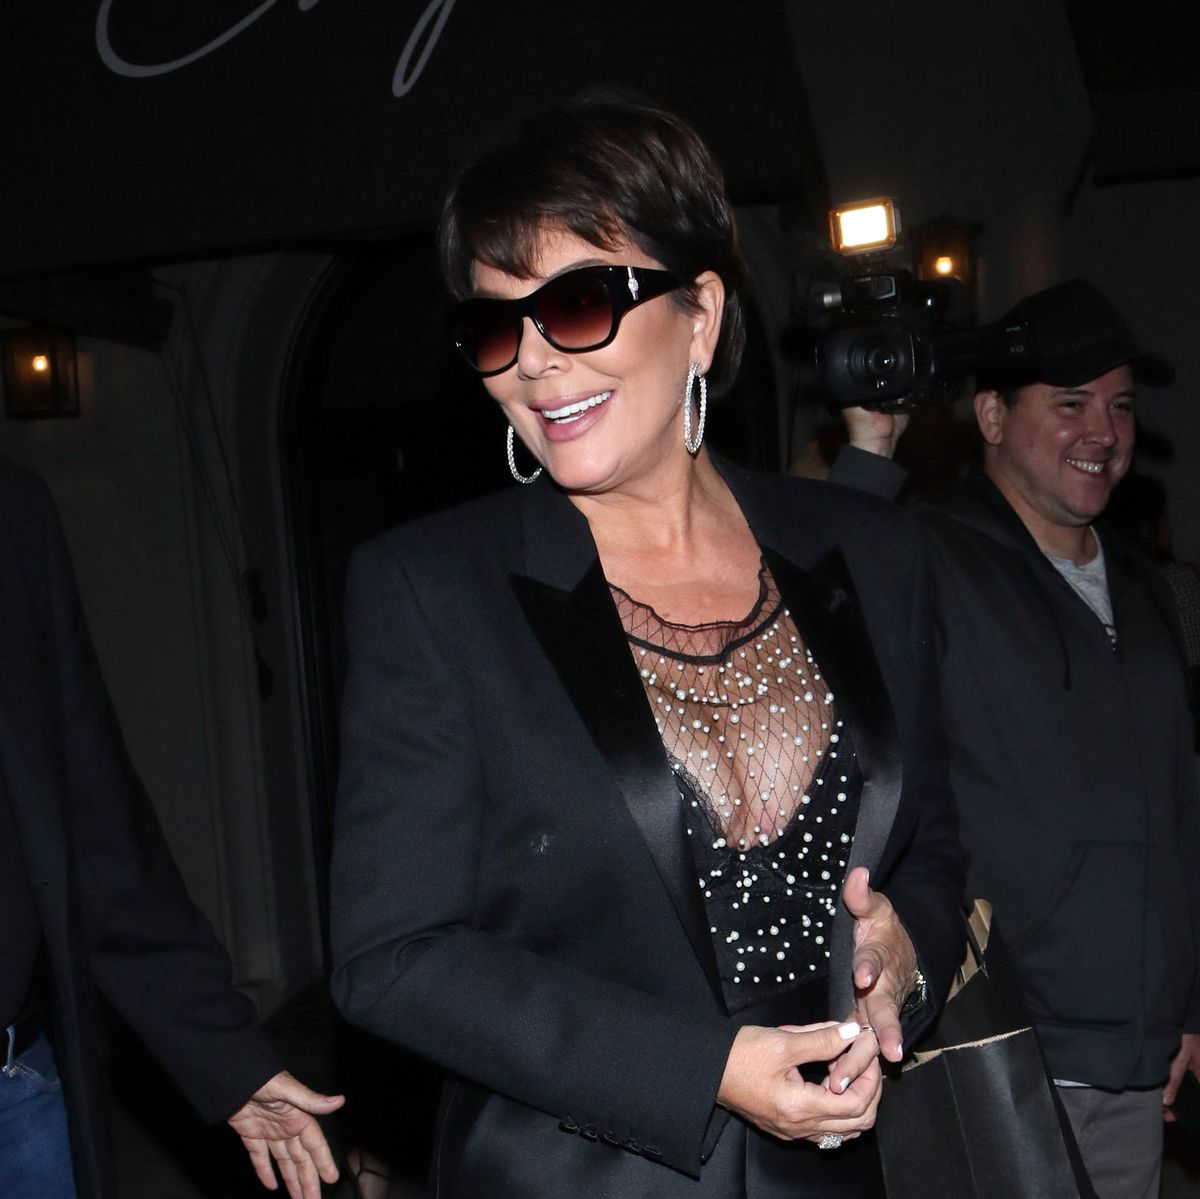 https://hips.hearstapps.com/hmg-prod/images/kris-jenner-is-seen-on-september-9-2019-at-los-angeles-news-photo-1568299037.jpg?crop=0.871xw:0.642xh;0.0879xw,0&resize=1200:*